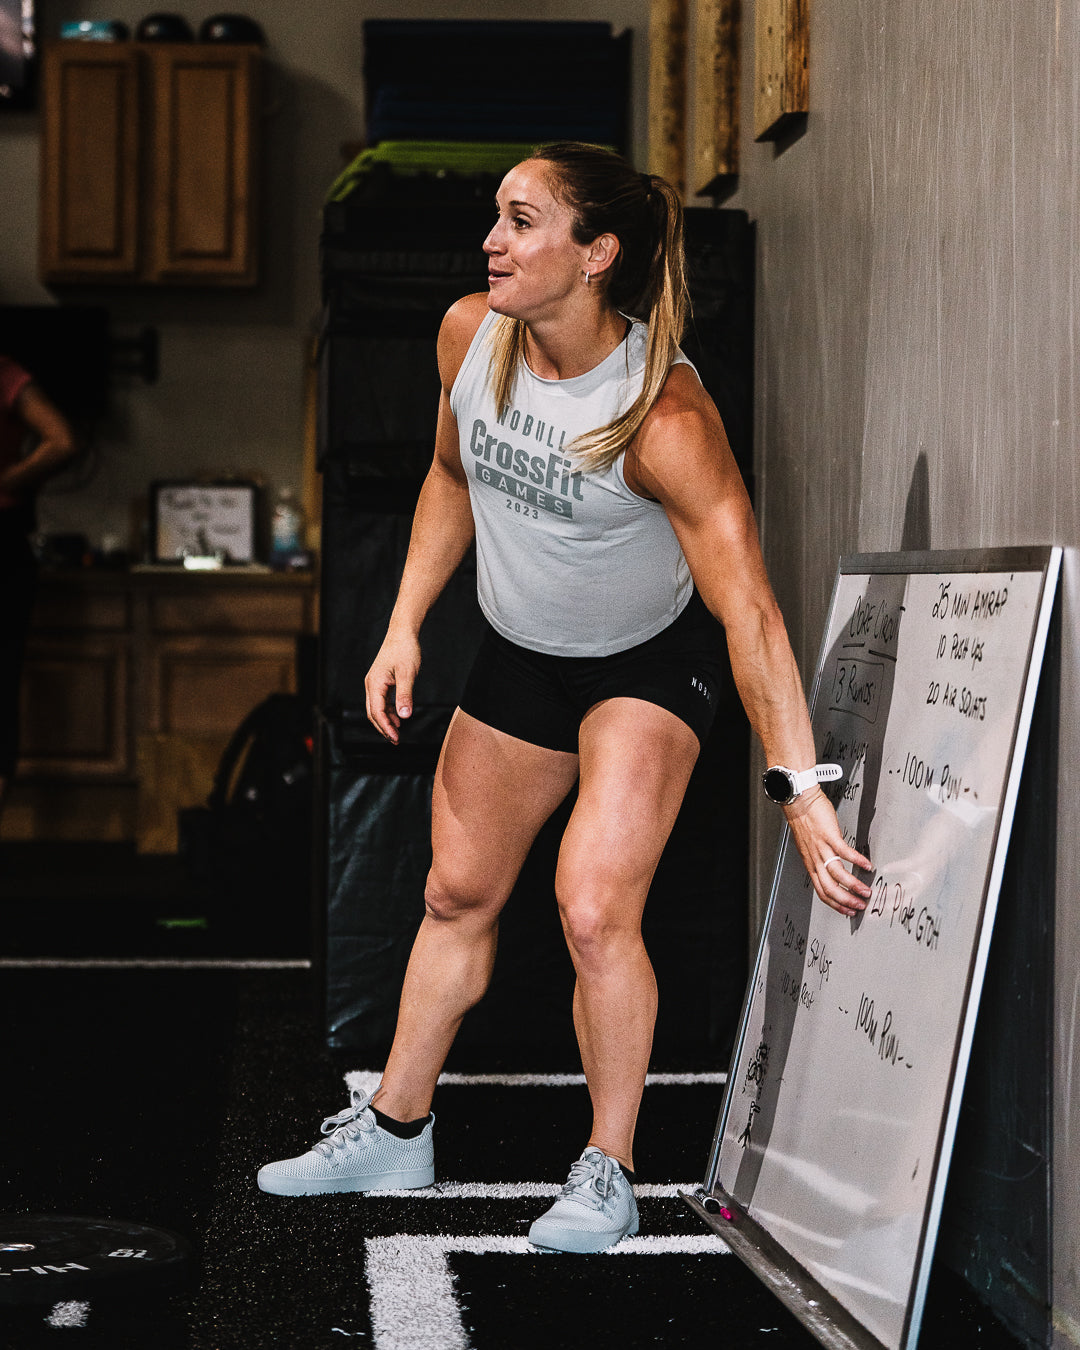 CrossFit athlete Kristi Eramo gets ready to workout wearing casual athletic apprel and arctic print Rec Trainer shoes